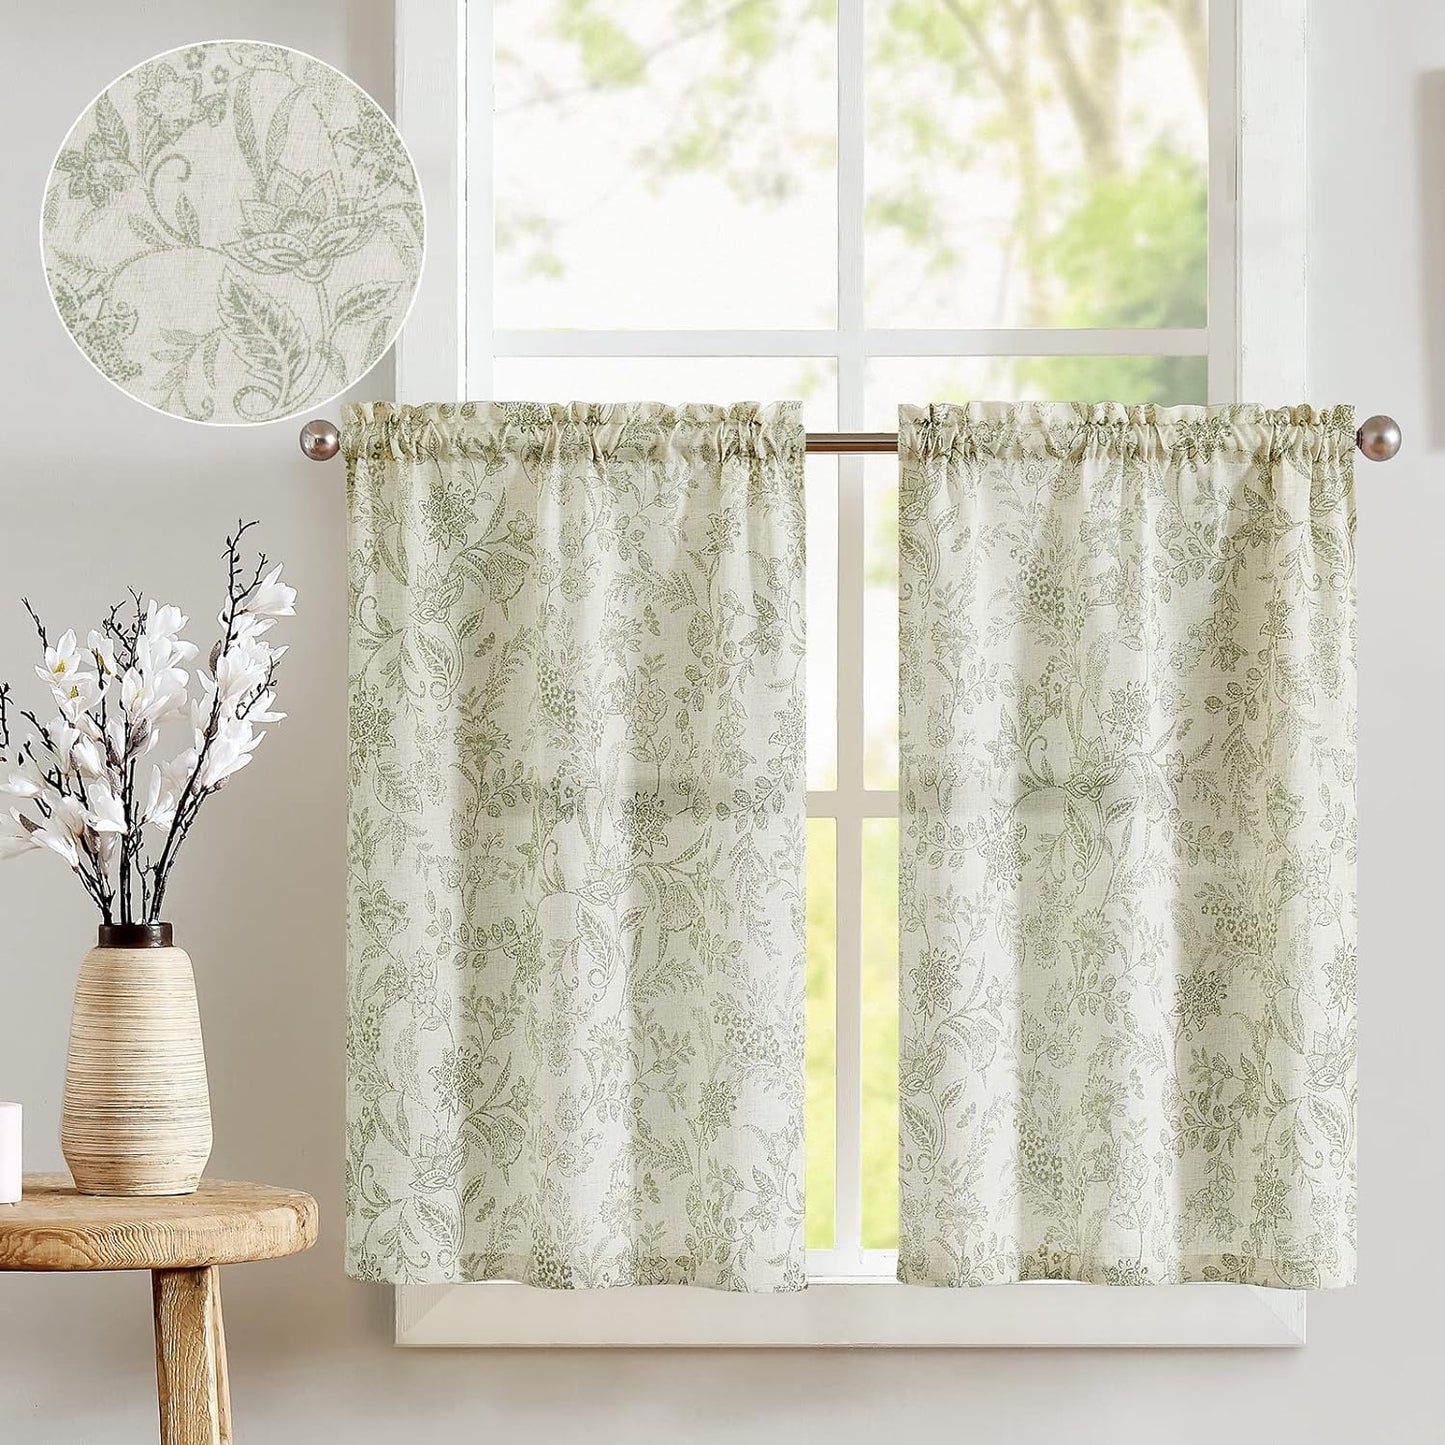 Jinchan Beige Kitchen Curtains Linen Tier Curtains 24 Inch Farmhouse Cafe Curtains Light Filtering Small Window Curtains Flax Country Rustic Rod Pocket Bathroom Laundry Room RV 2 Panels Crude  CKNY HOME FASHION Forest Sage Green On Beige 24L 